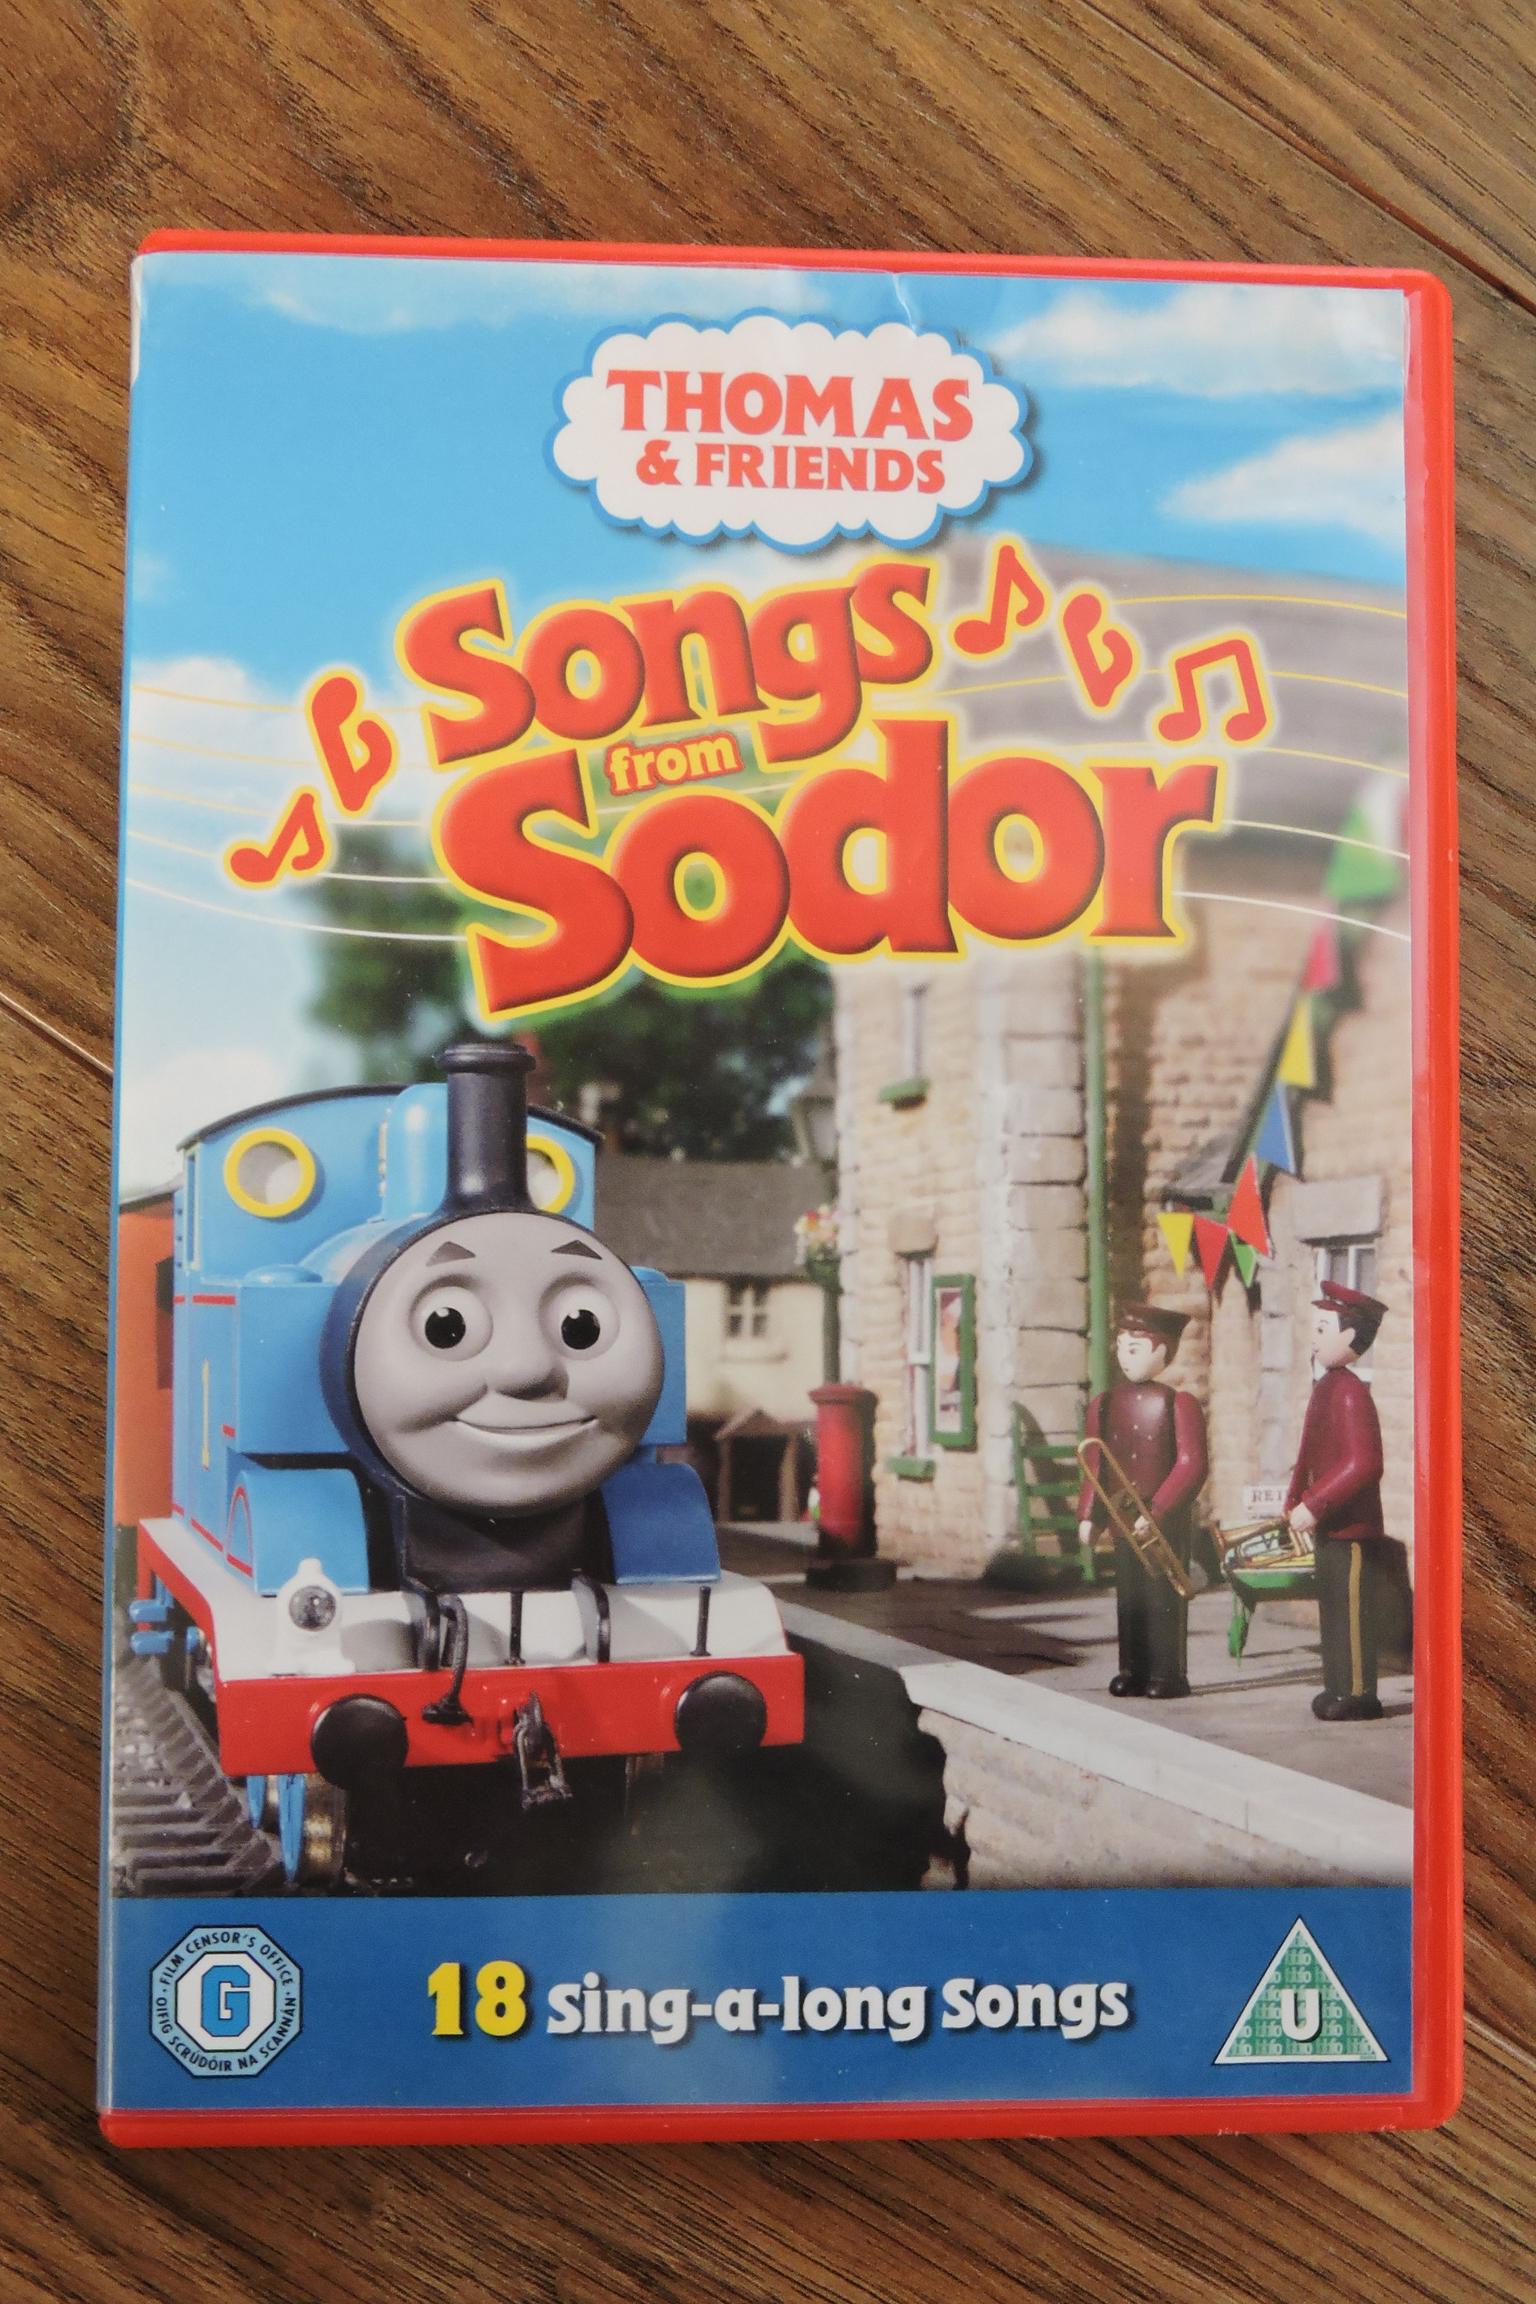 Thomas Dvd Songs From Sodor In Coventry For 2 00 For Sale Shpock